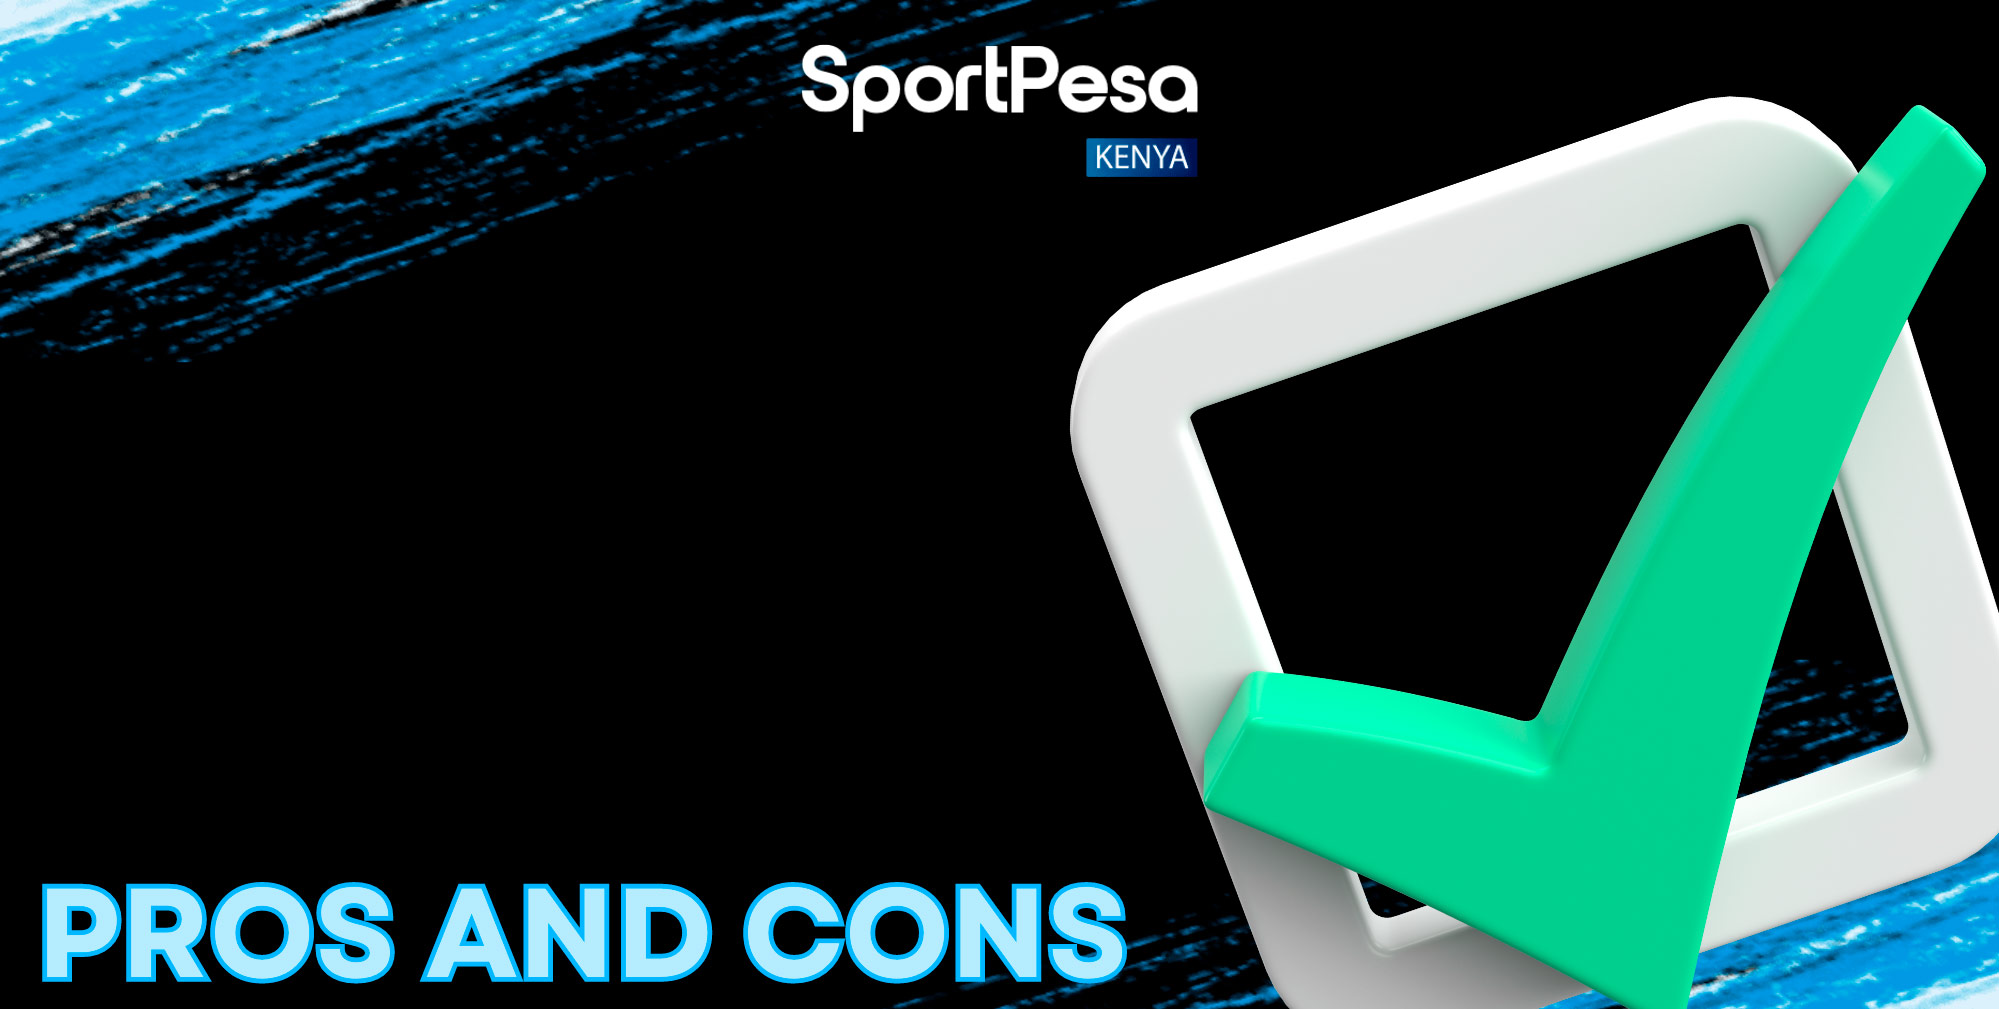 The Sportpesa app has many advantages and few disadvantages